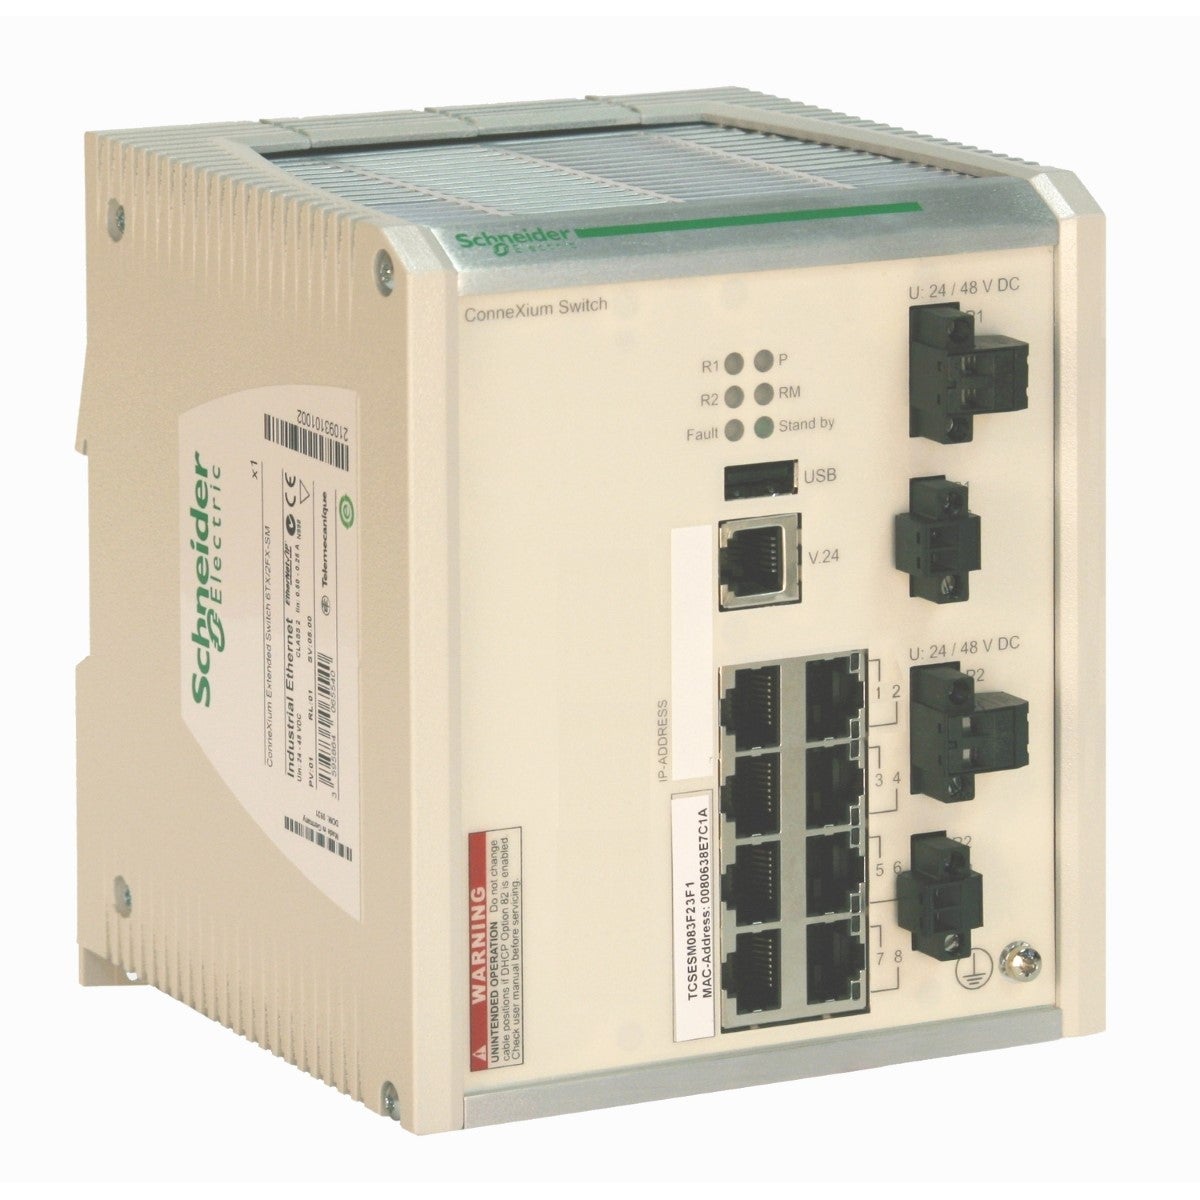 ConneXium Extended Managed Switch - 8 ports for copper